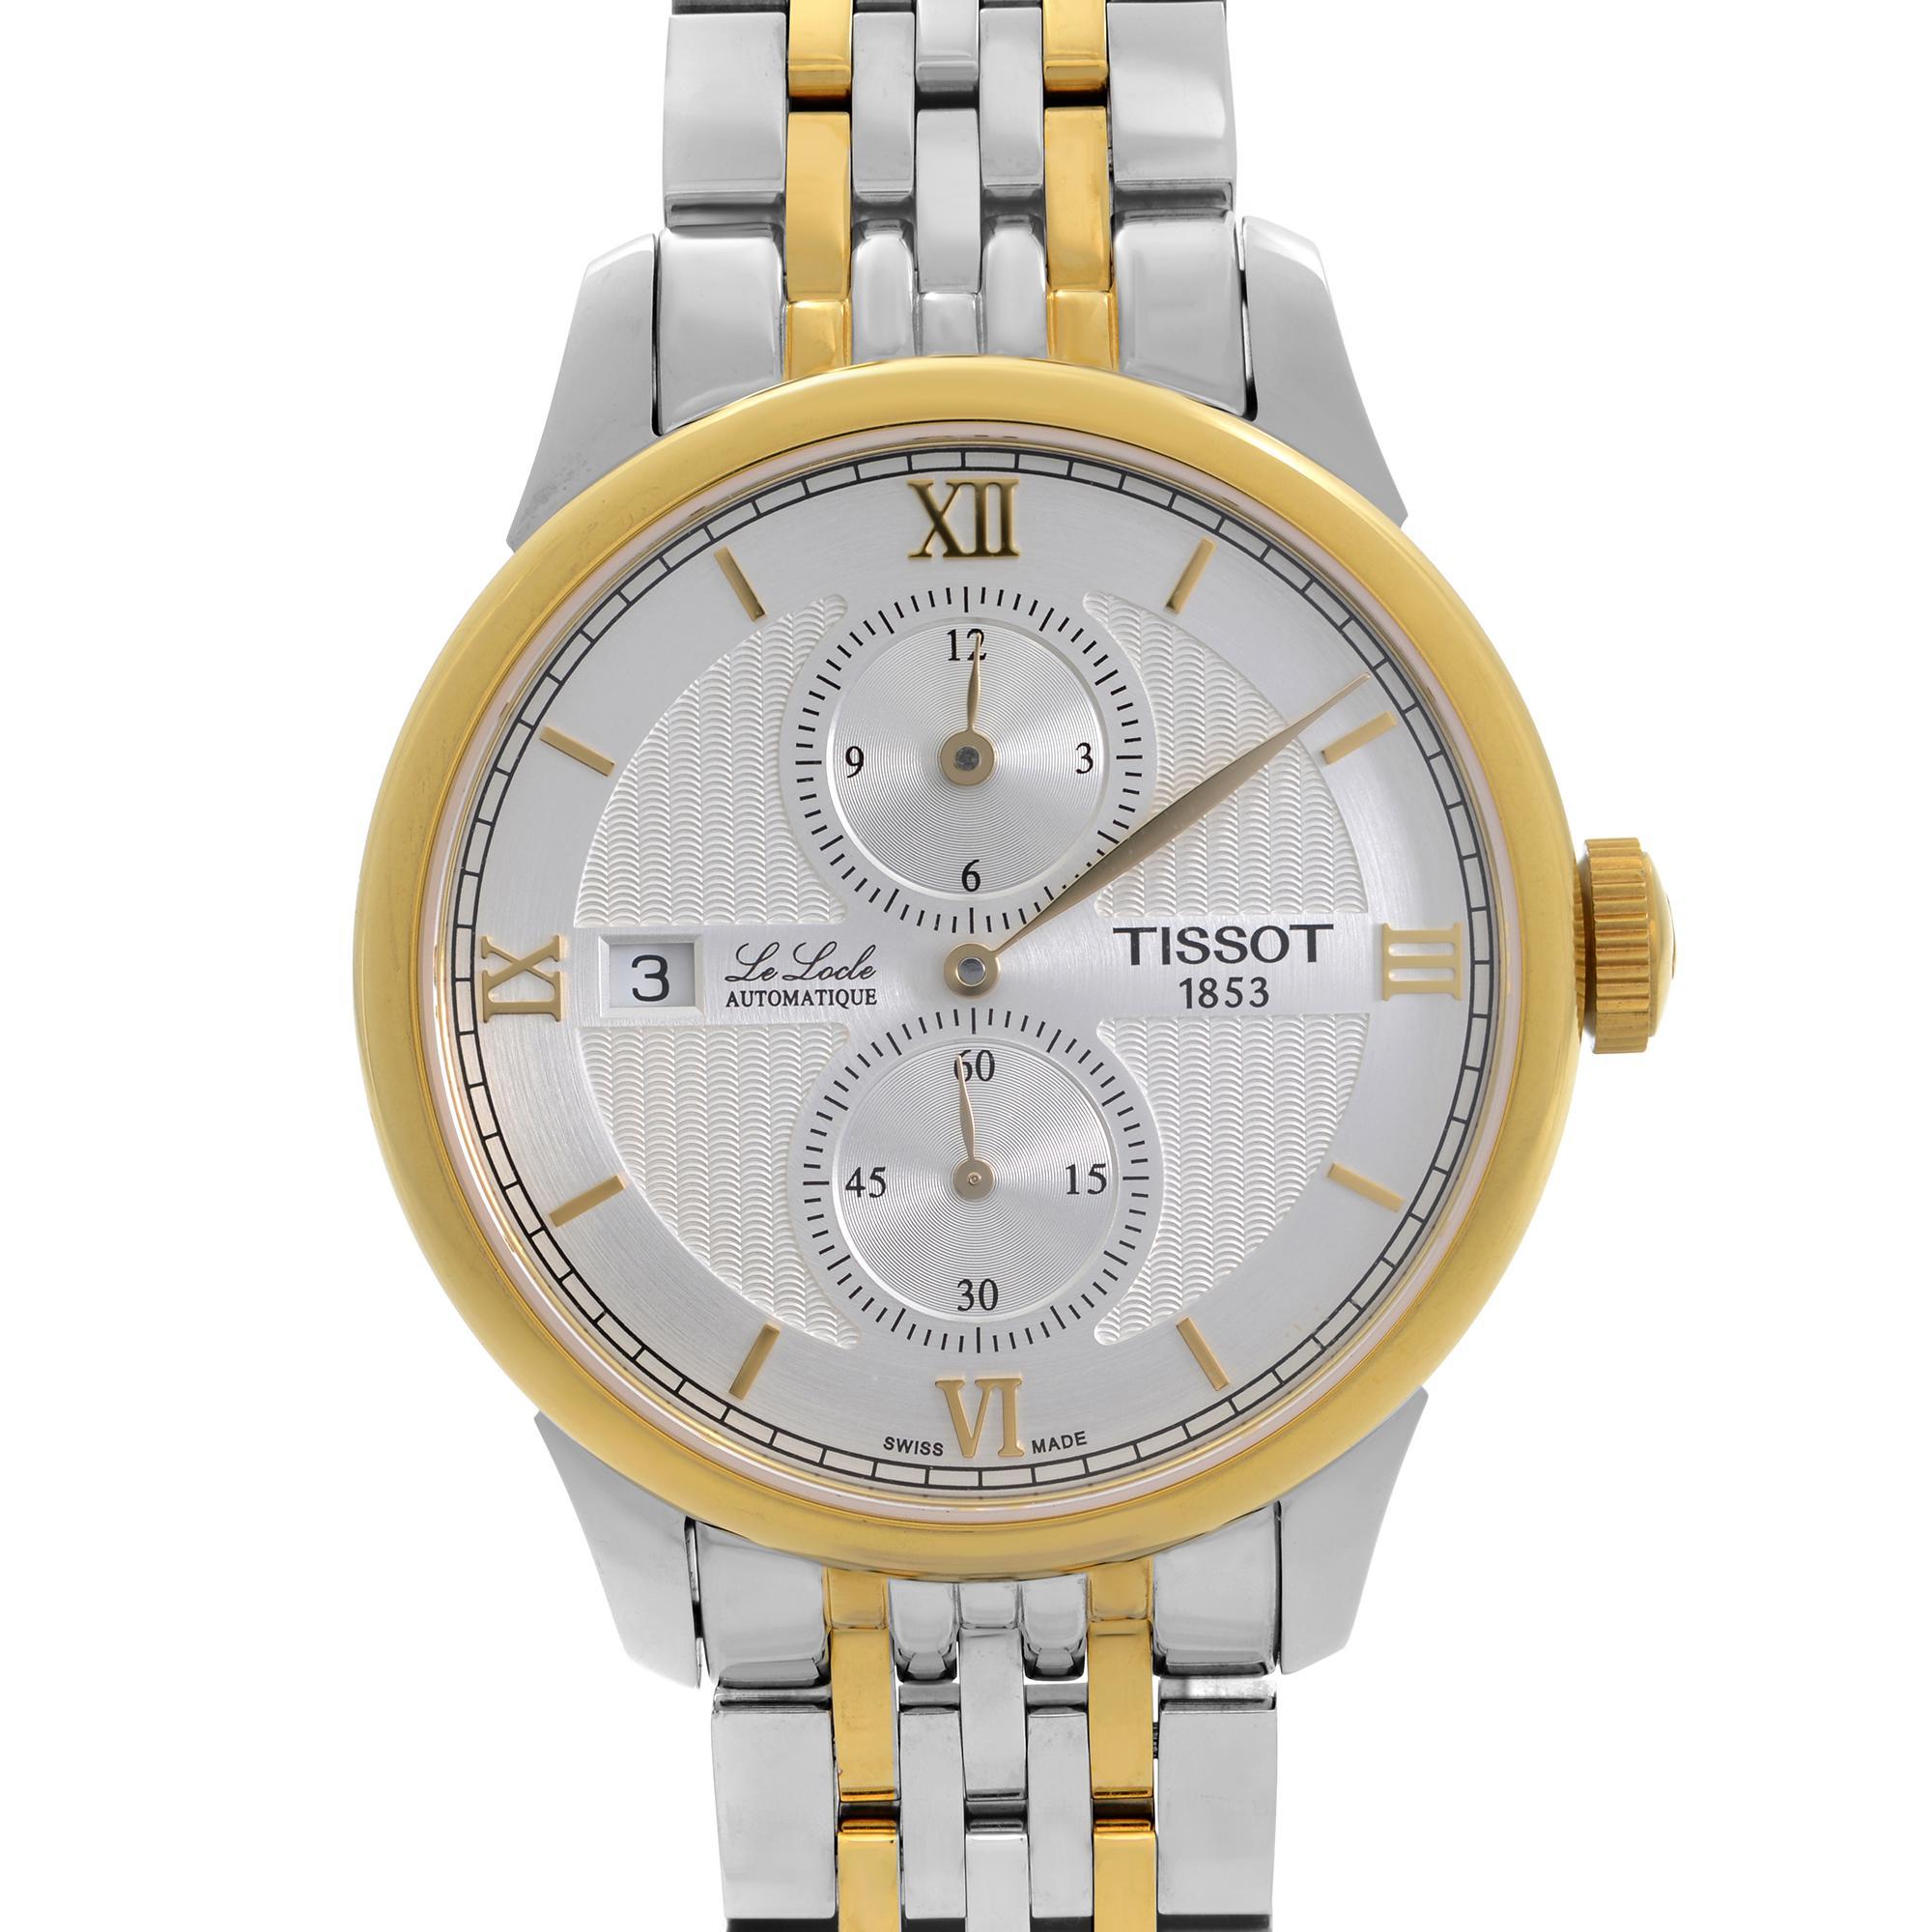 Pre-owned mint Tissot Le Locle Automatic Regulator Two-Tone Silver Dial Watch T006.428.22.038.02. The watch was never owned but has micro Scratches On the Gold-Tone Bezel And Bracelet visible Under Closer Inspection due to storing and Handling. This